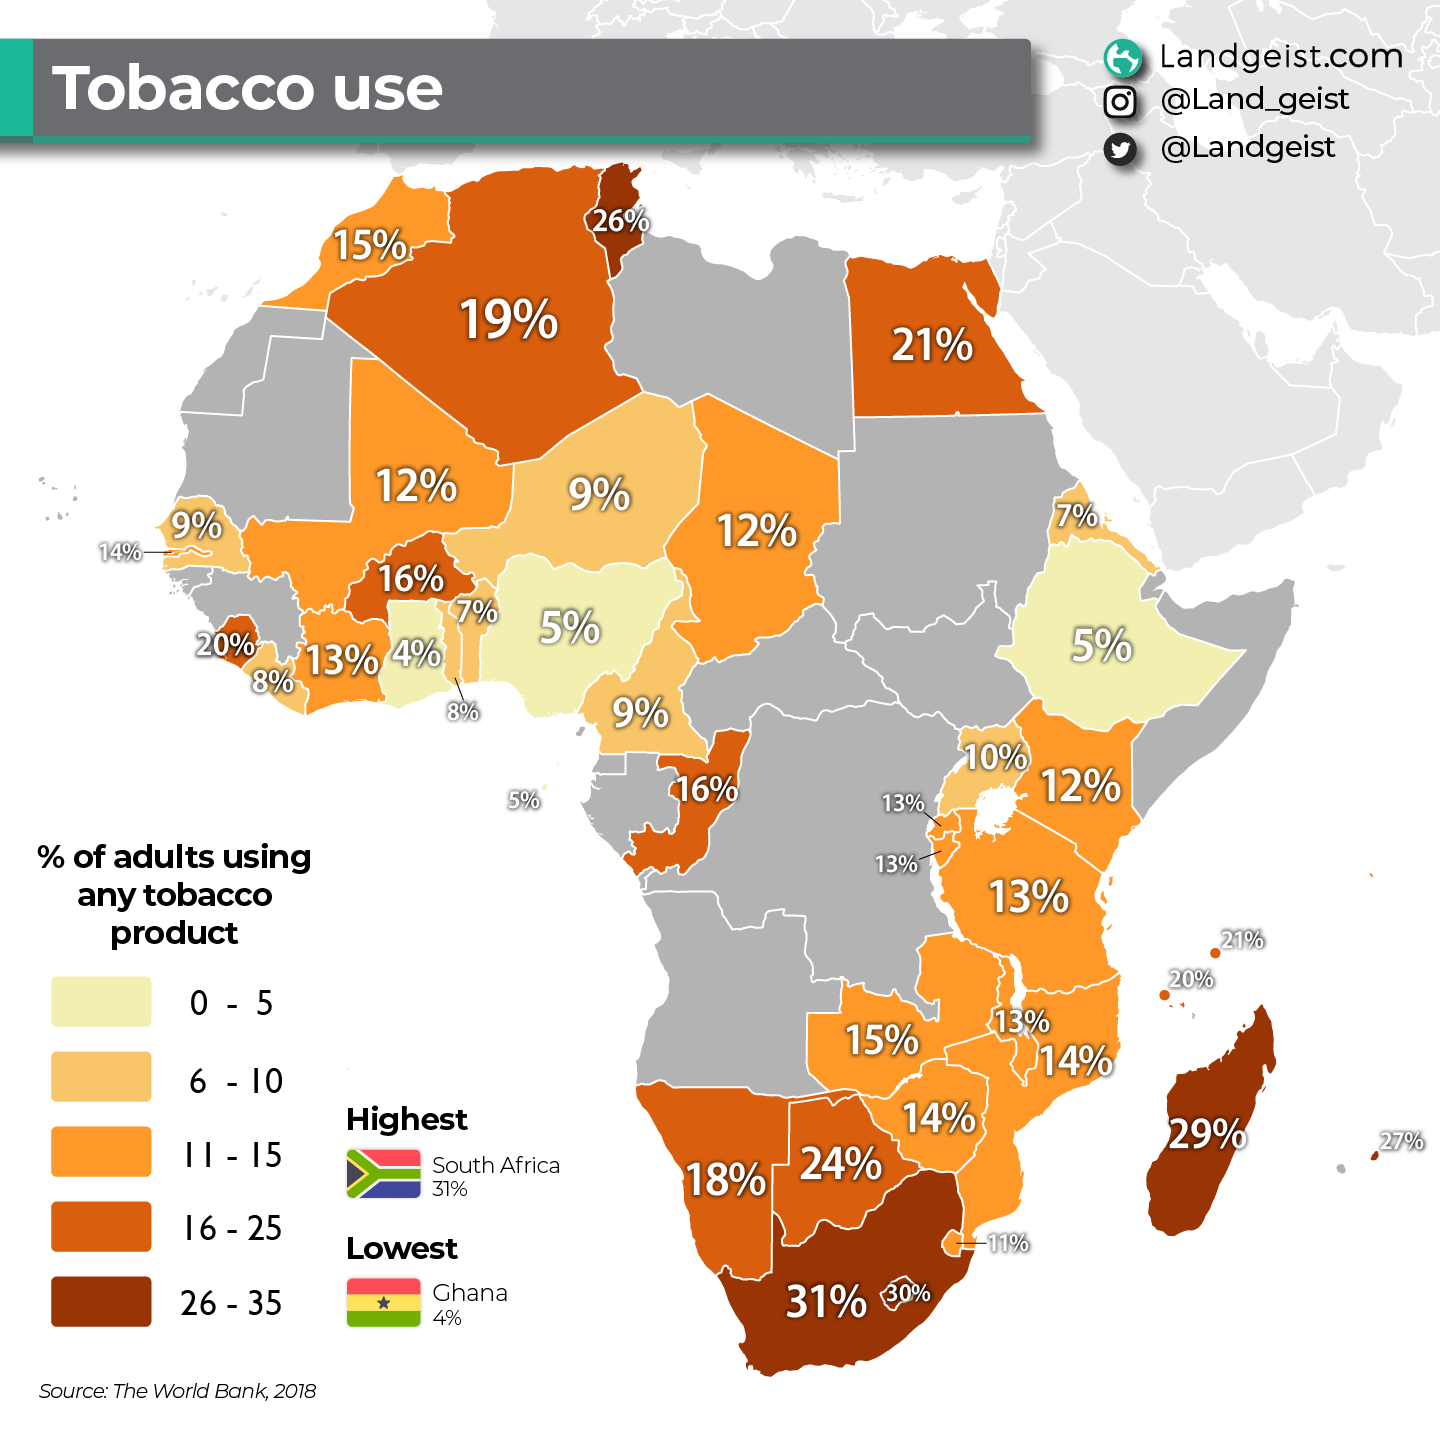 Map of the tobacco use in Africa.